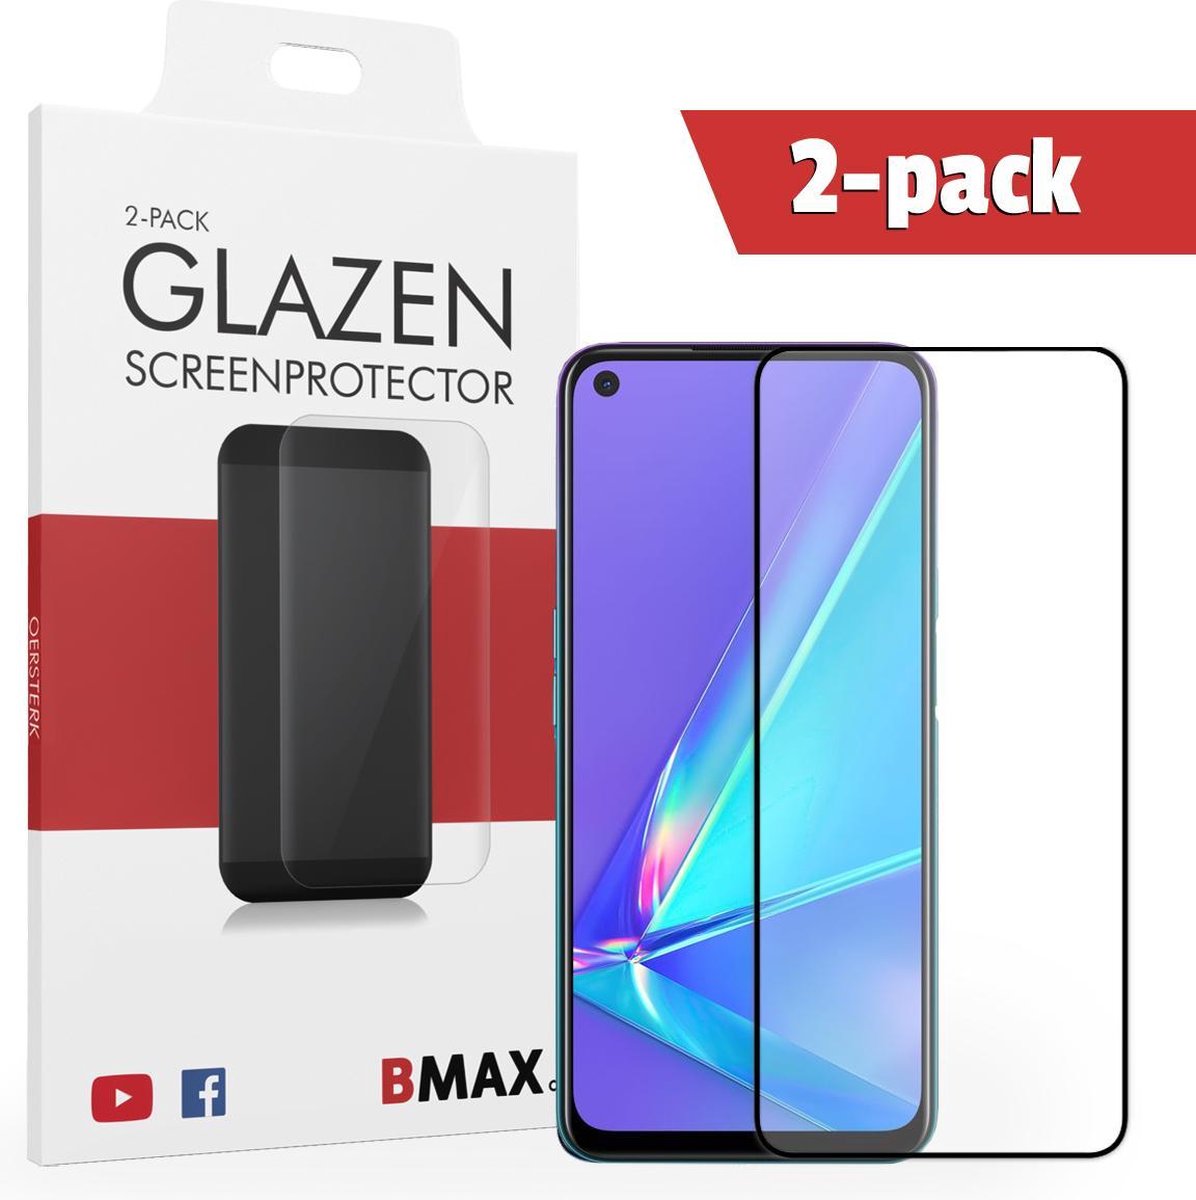 2-pack Bmax Oppo A72 Screenprotector - Glass - Full Cover 2.5d - Black/zwart